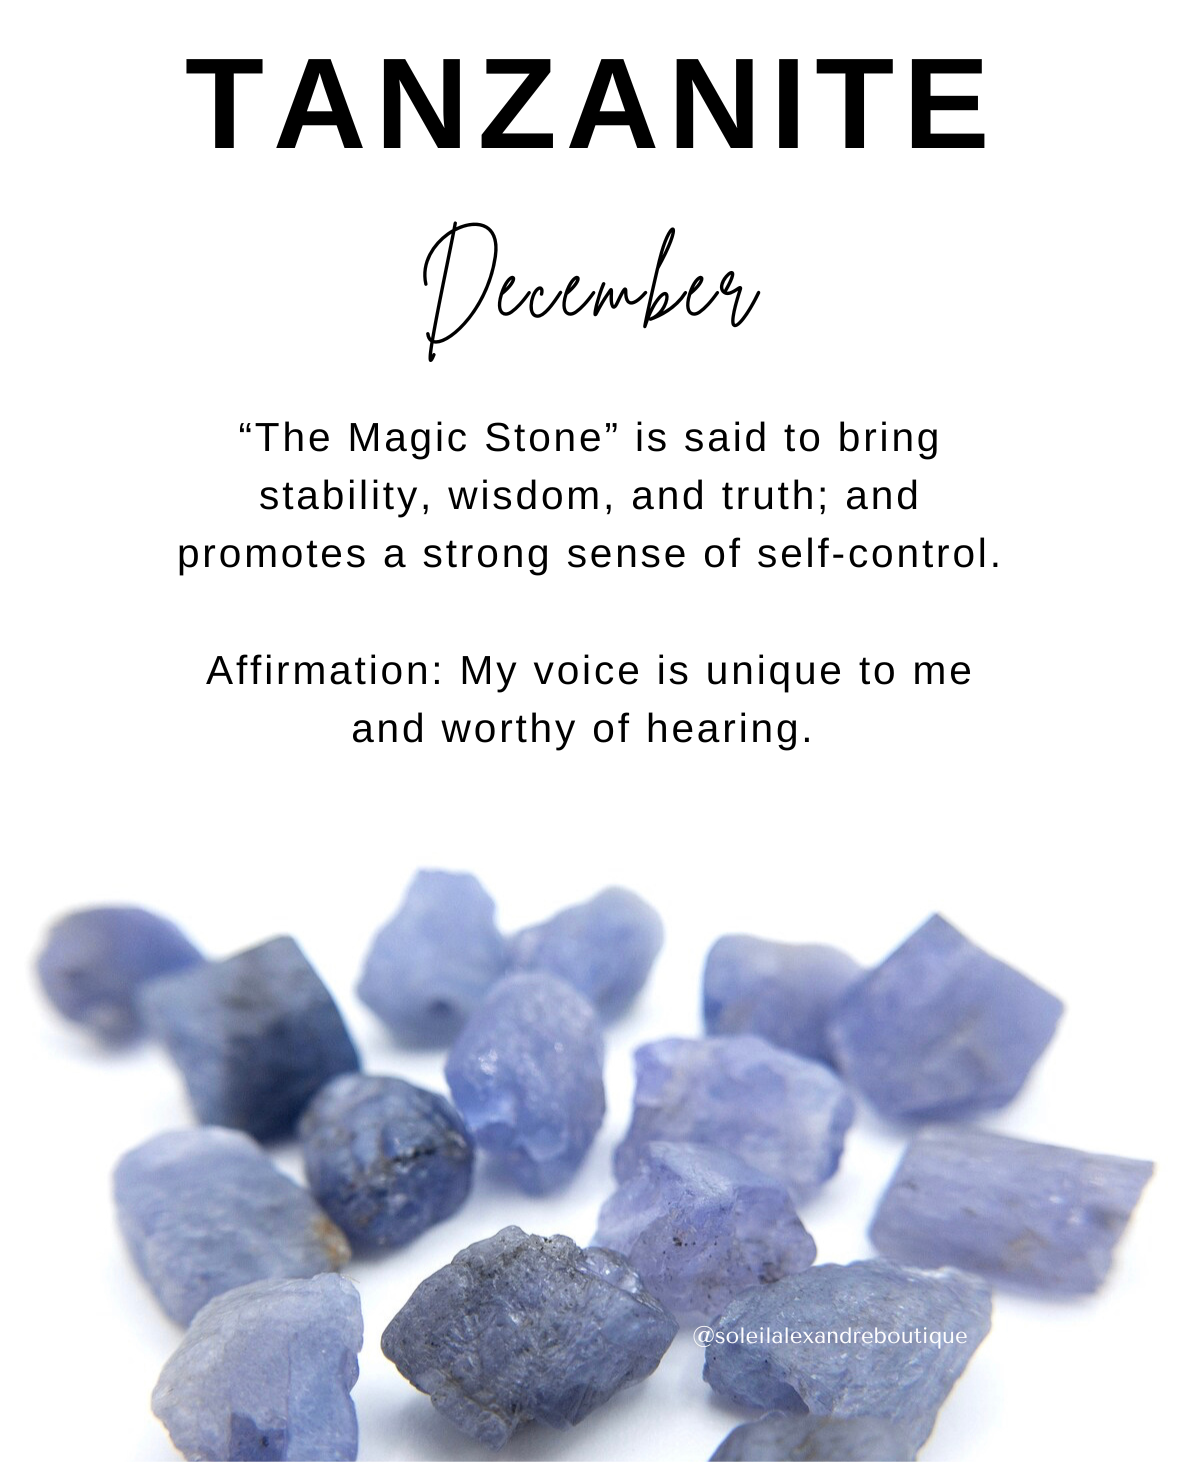 Tanzanite information card with affirmation.